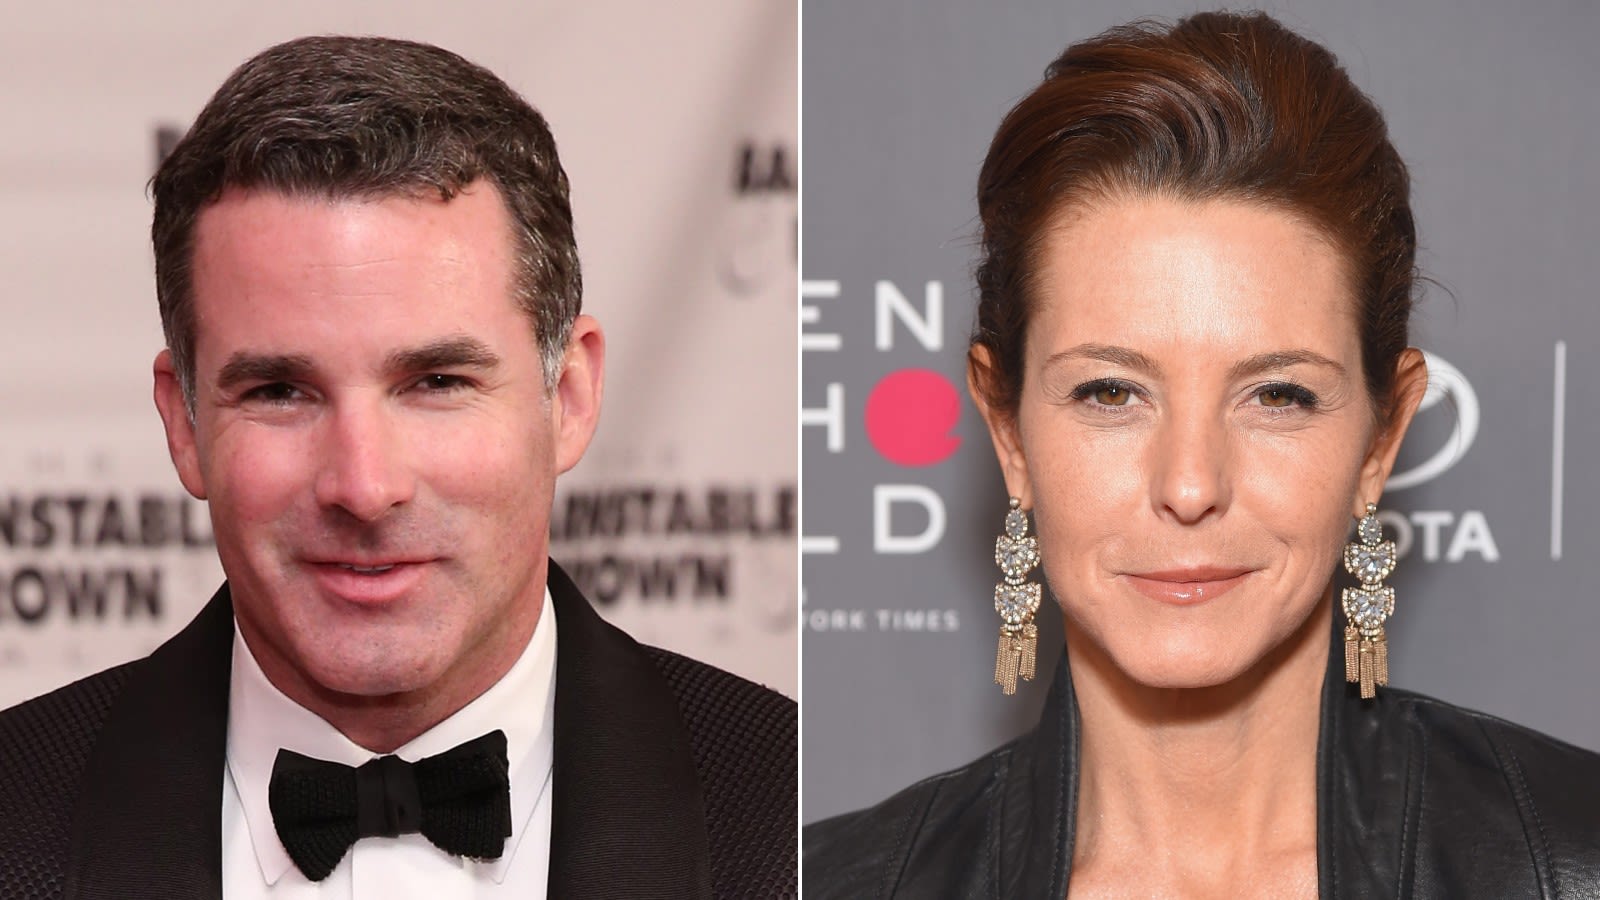 WSJ: Under Armour CEO's with MSNBC causes stir | CNN Business